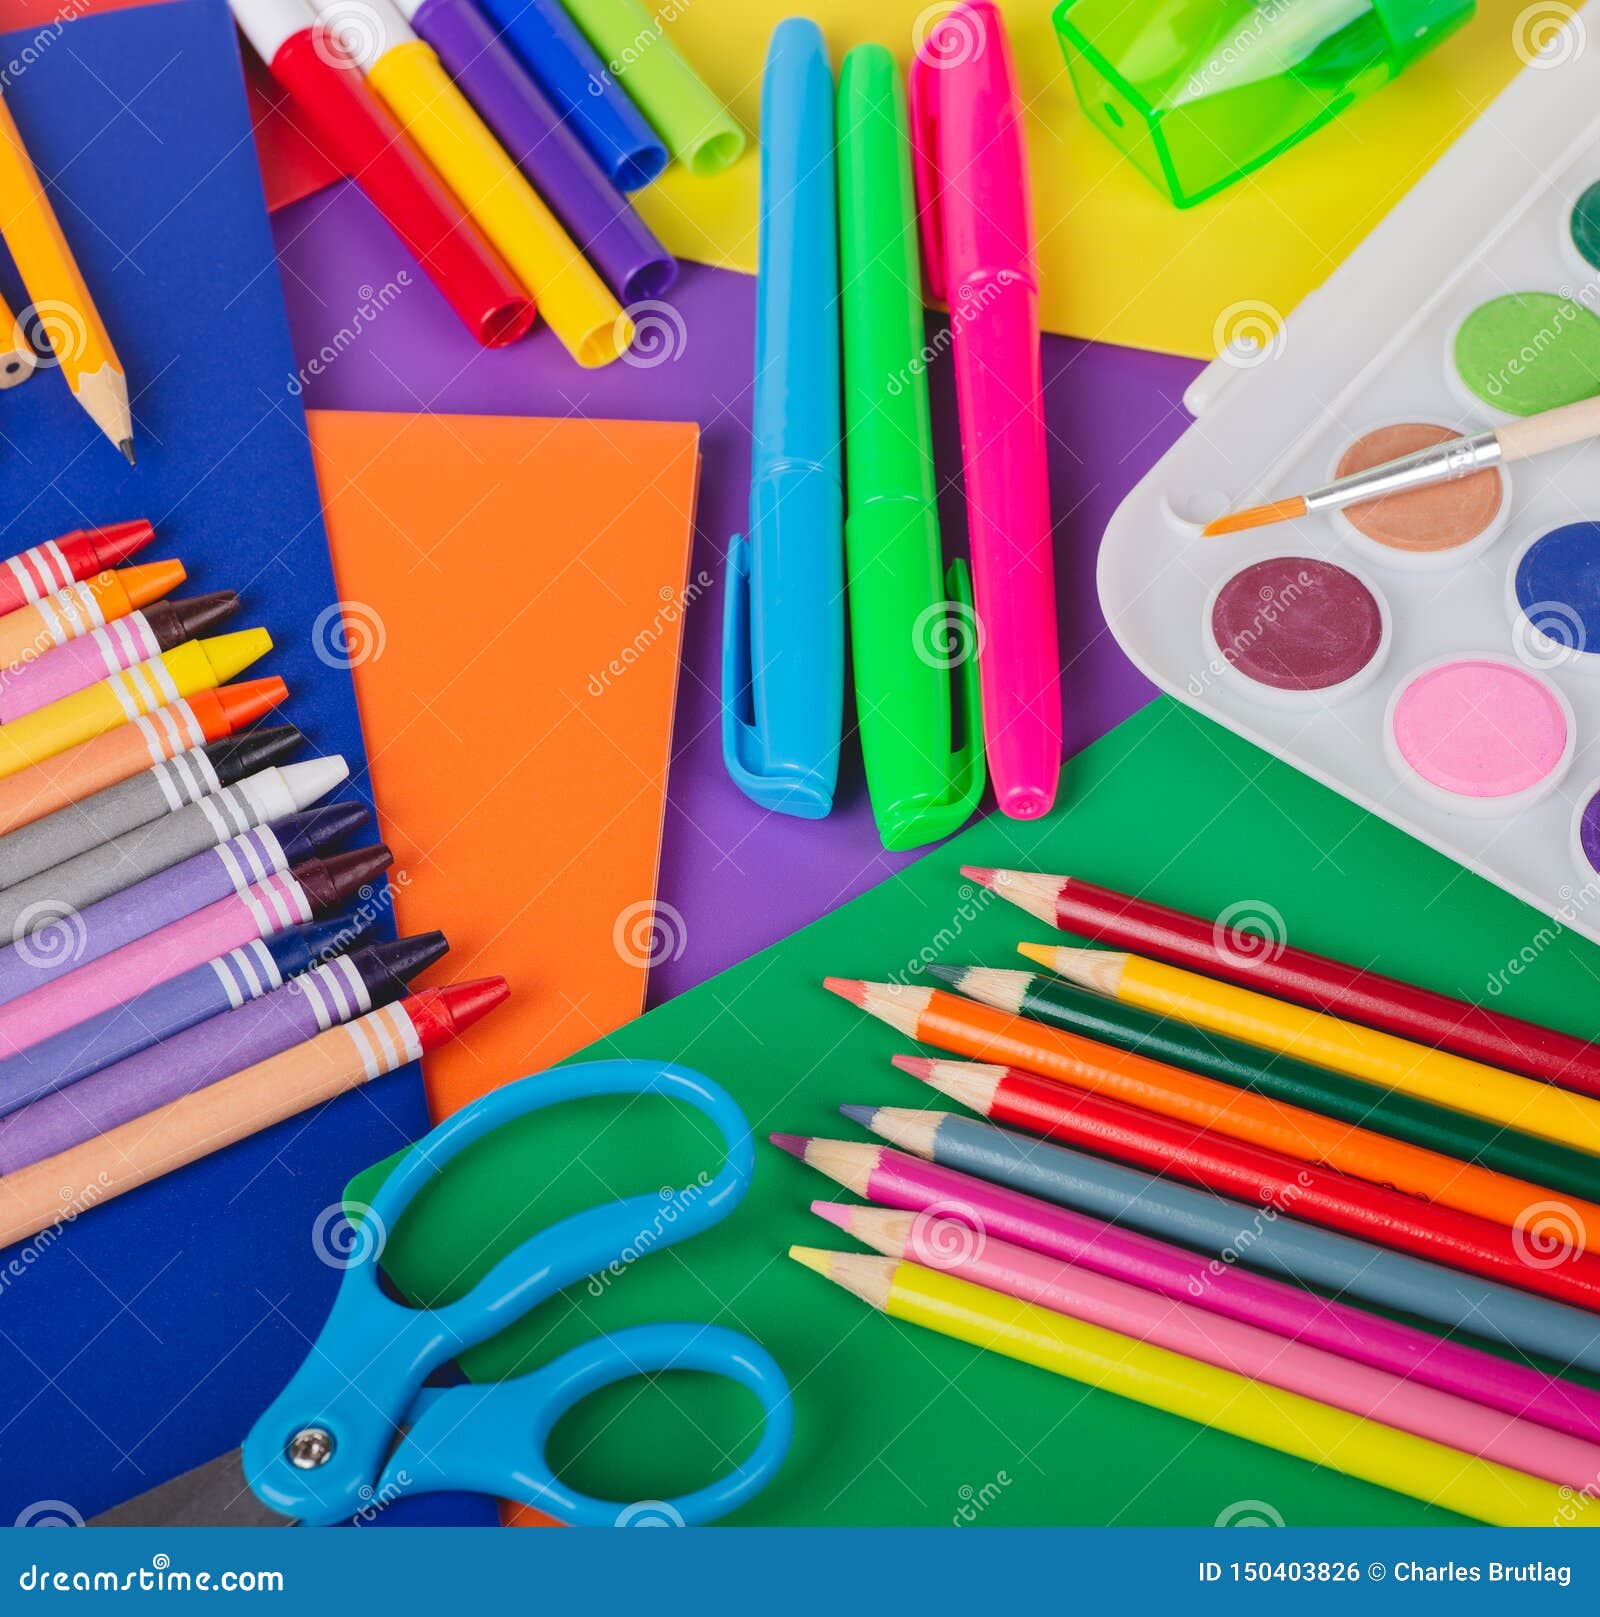 https://thumbs.dreamstime.com/z/overhead-view-colorful-drawing-coloring-school-supplies-crayons-pencils-markers-paint-150403826.jpg